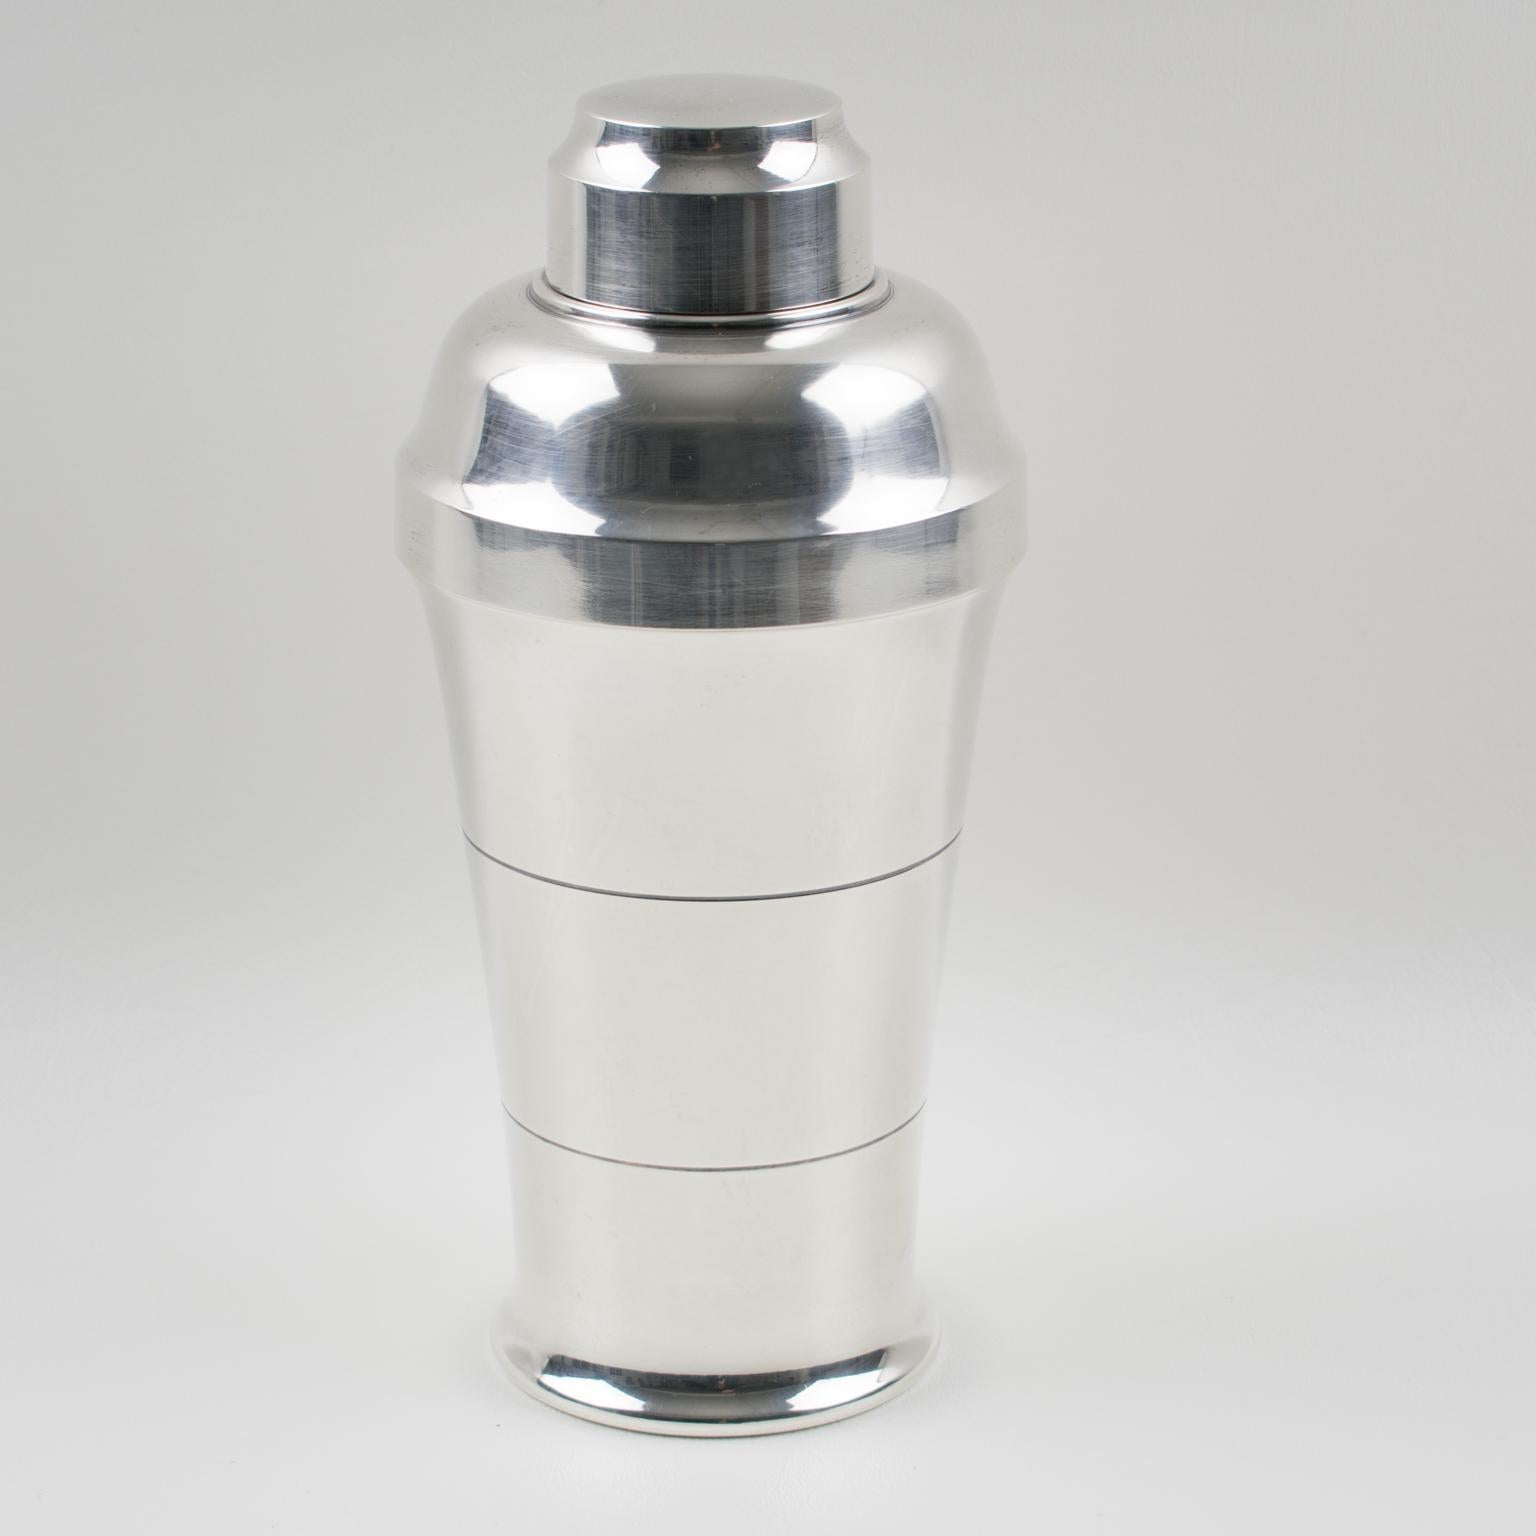 Elegant French Art Deco silver plate cylindrical cocktail or Martini Shaker by silversmith Saint Medard, Paris. Three sectioned designed cocktail Shaker with removable cap and strainer. Lovely Art Deco design with geometric design. Marked underside: